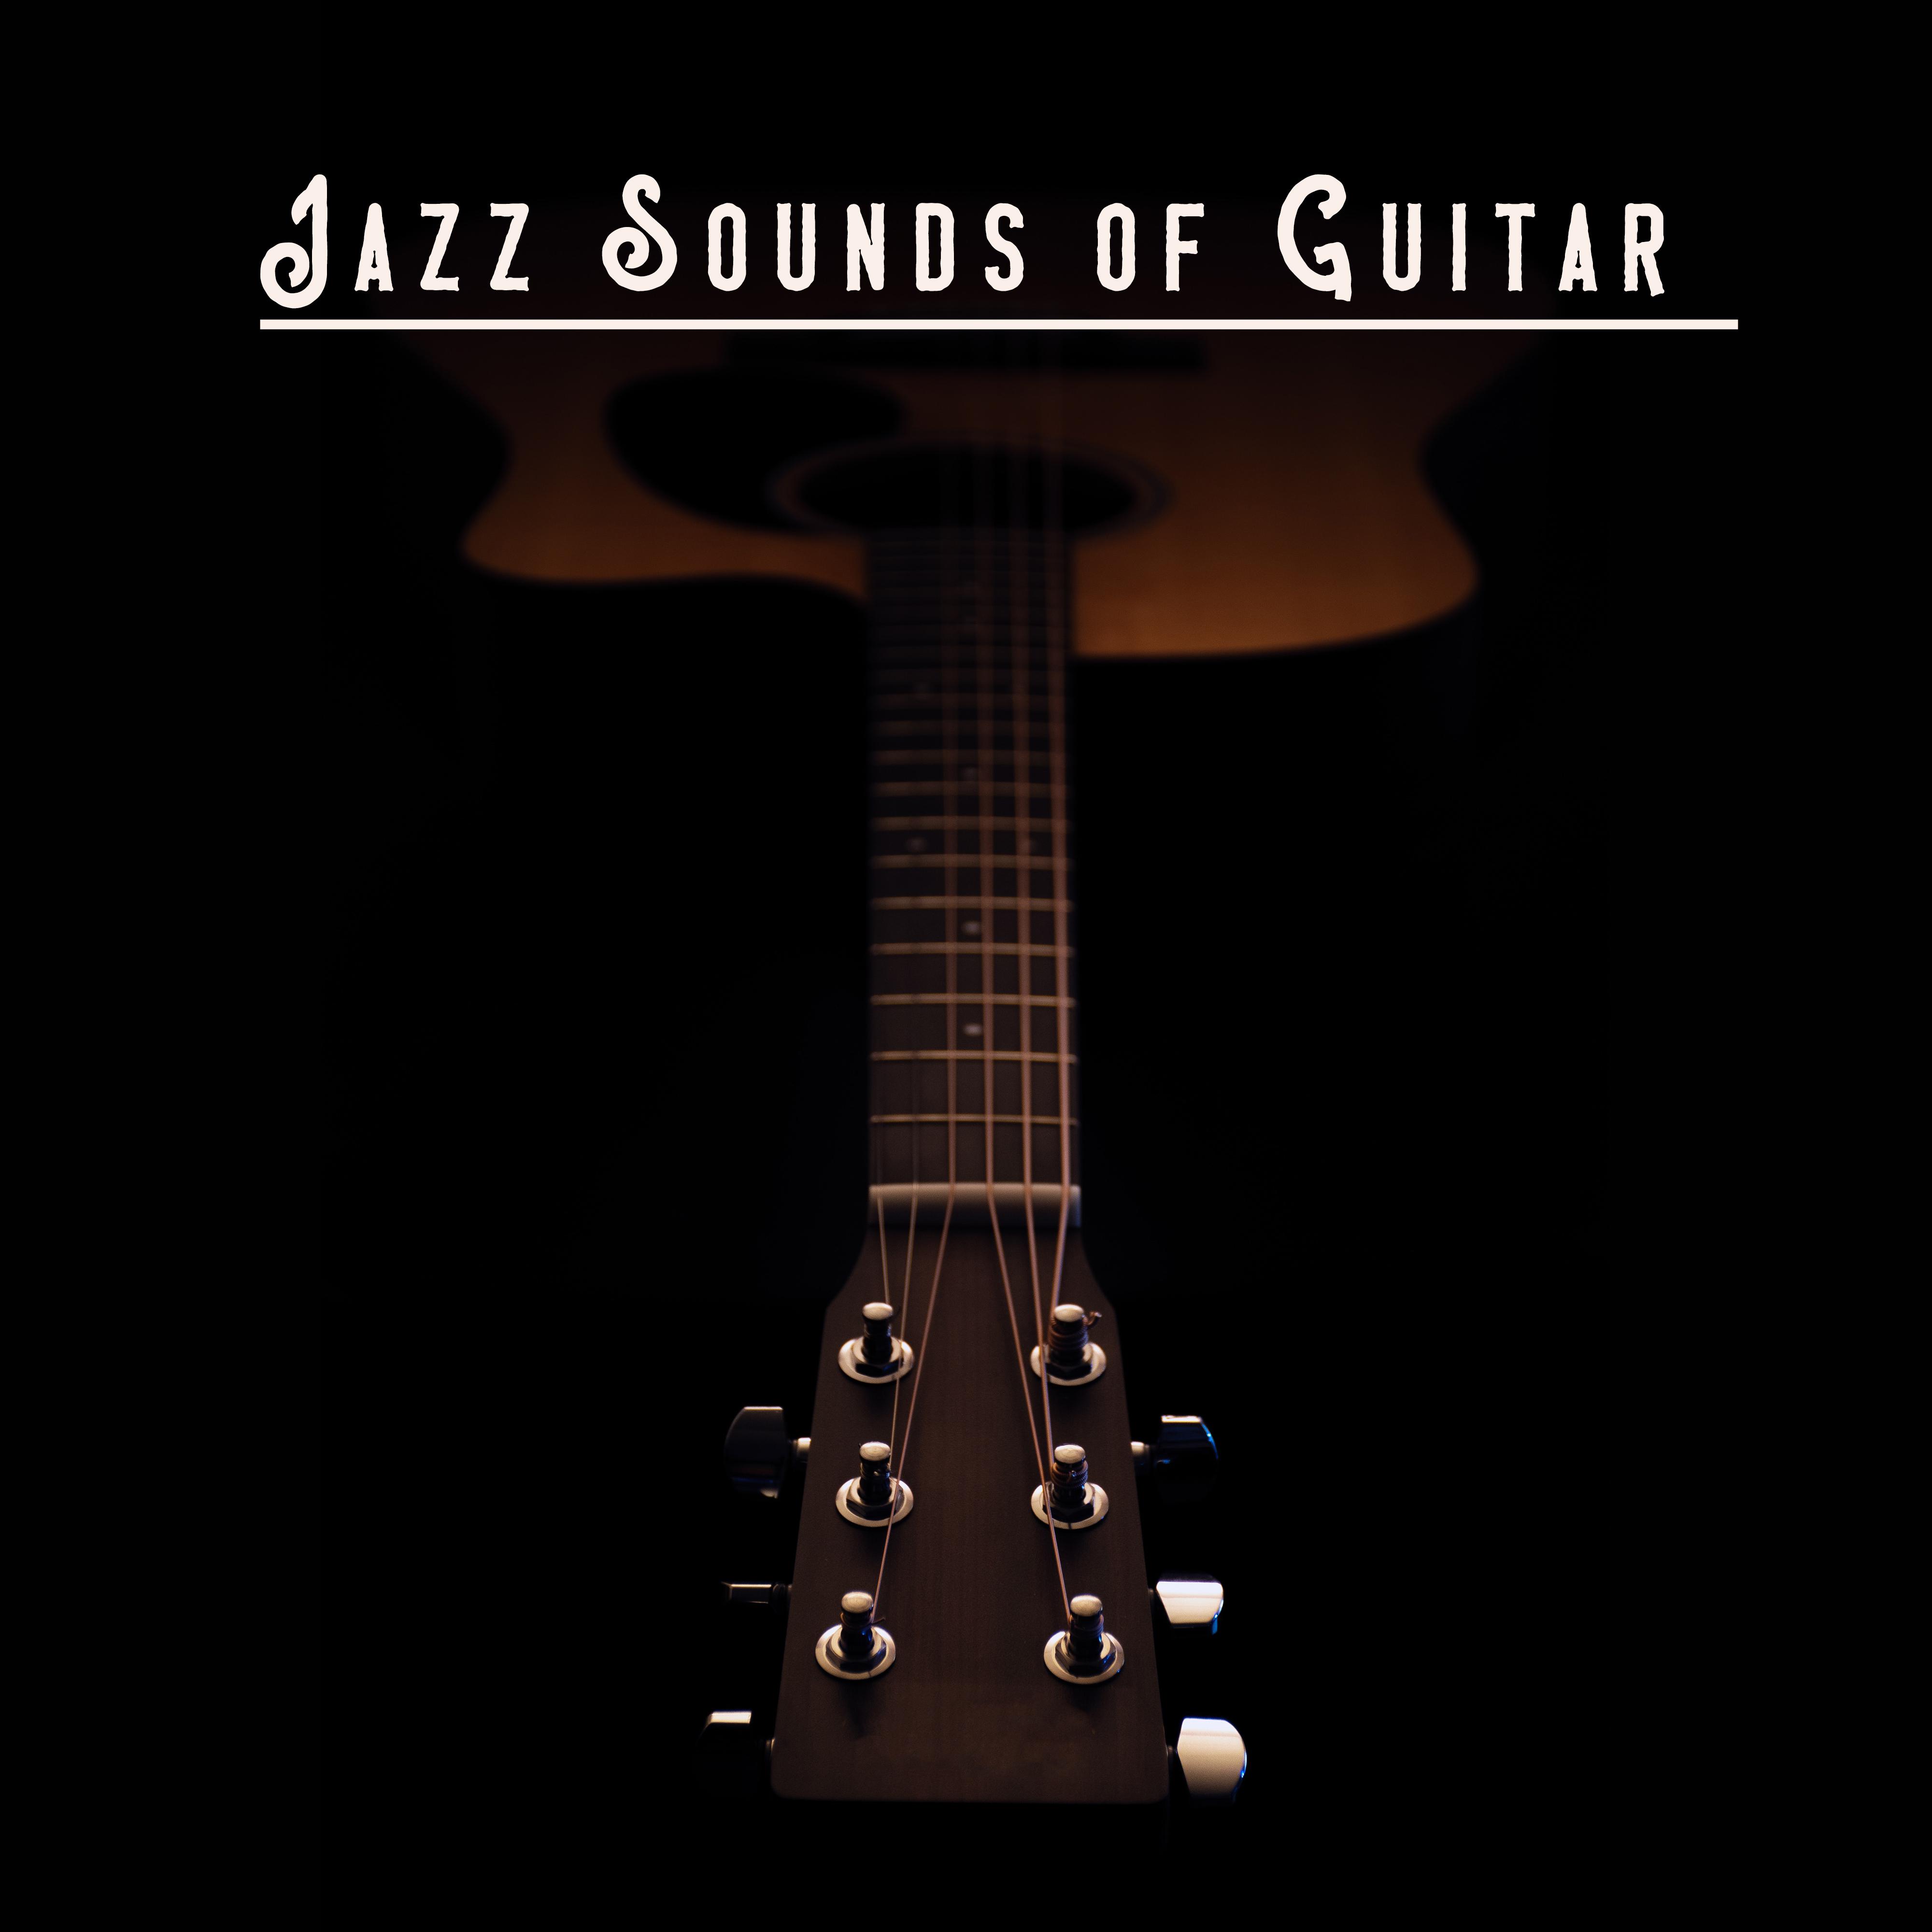 Jazz Sounds of Guitar  Jazz Relaxation After Work, Guitar Jazz, Smooth Music to Rest, Jazz Music Ambient, Mellow Songs, Coffee Jazz Playlist